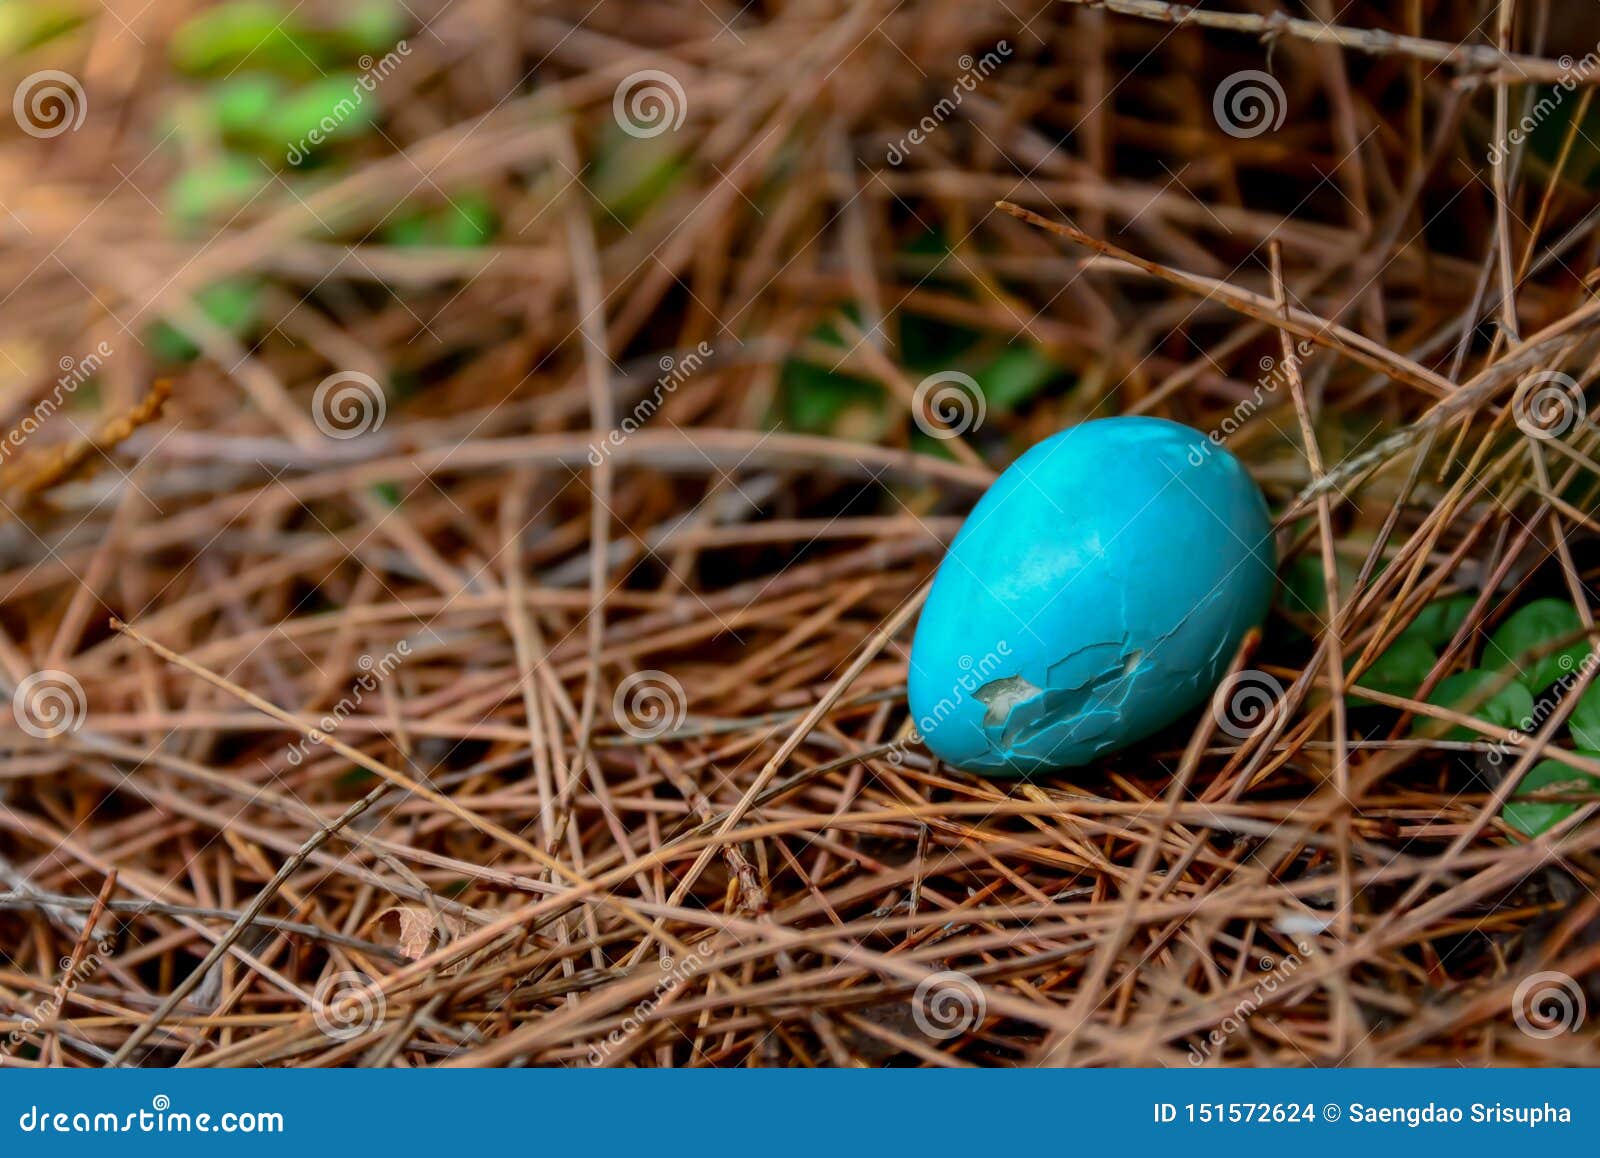 Jay Eggs Photos Free Royalty Free Stock Photos From Dreamstime